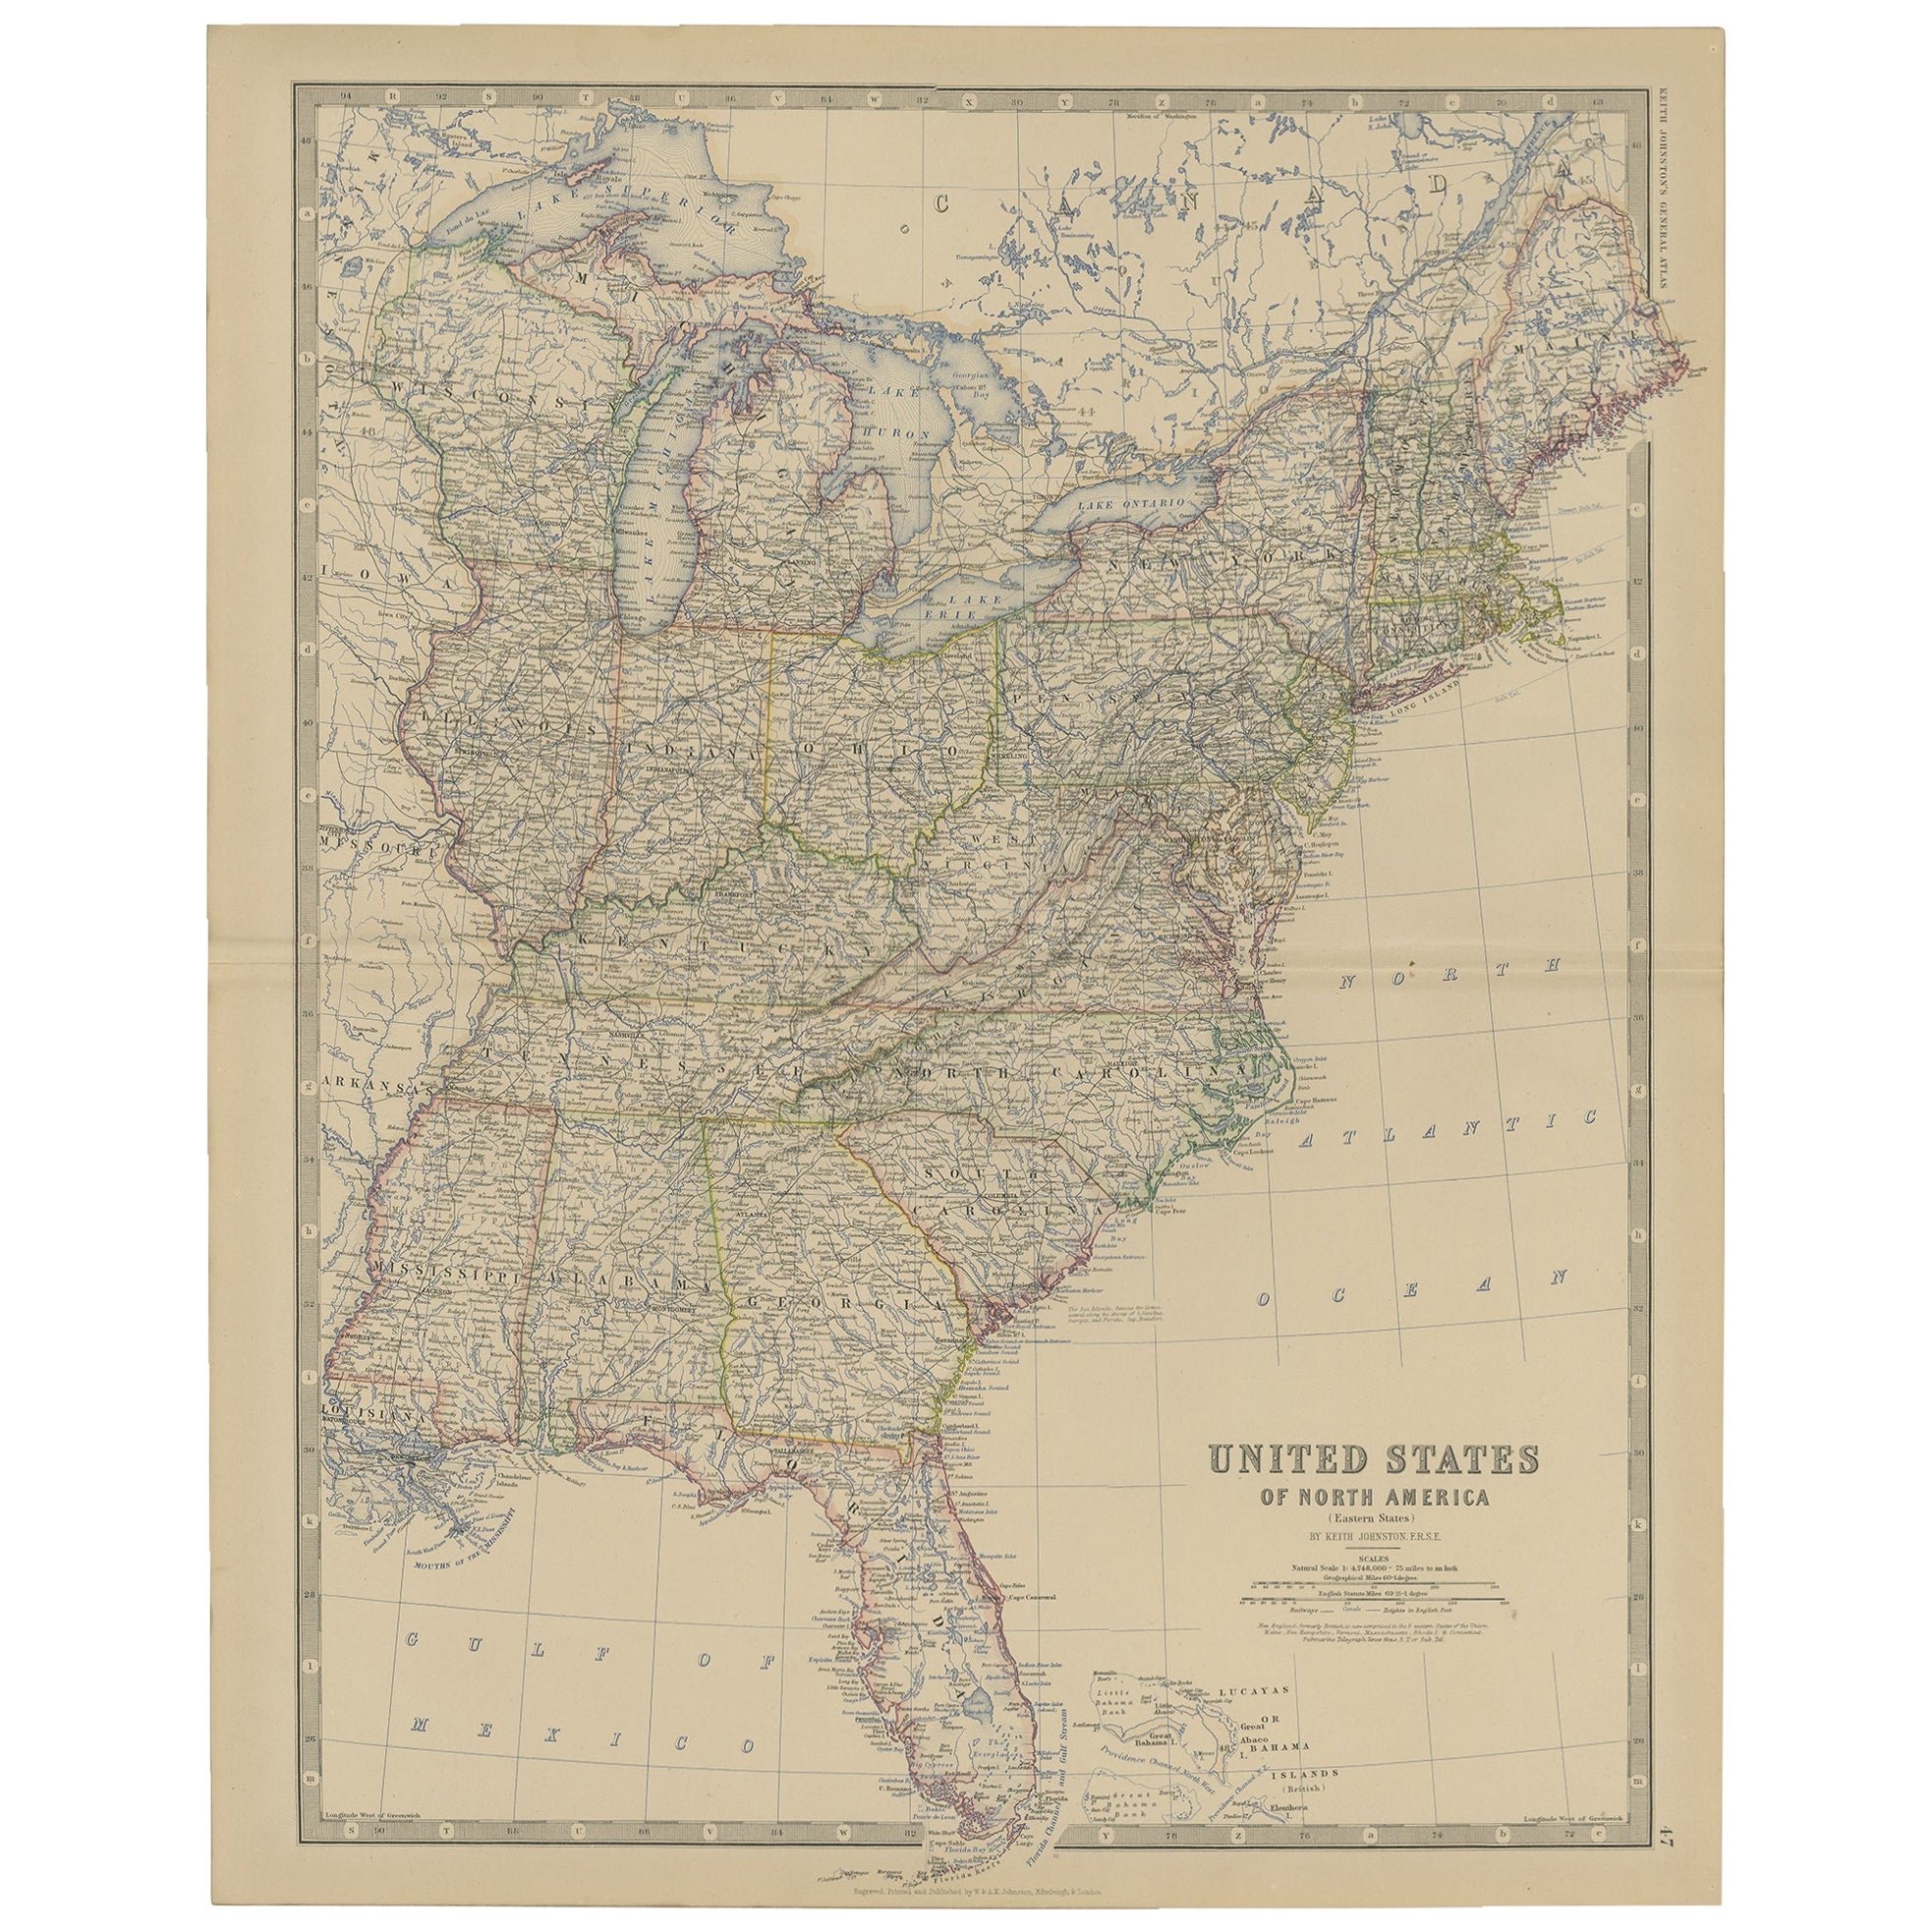 The Antique Map of the United States of North America, um 1882